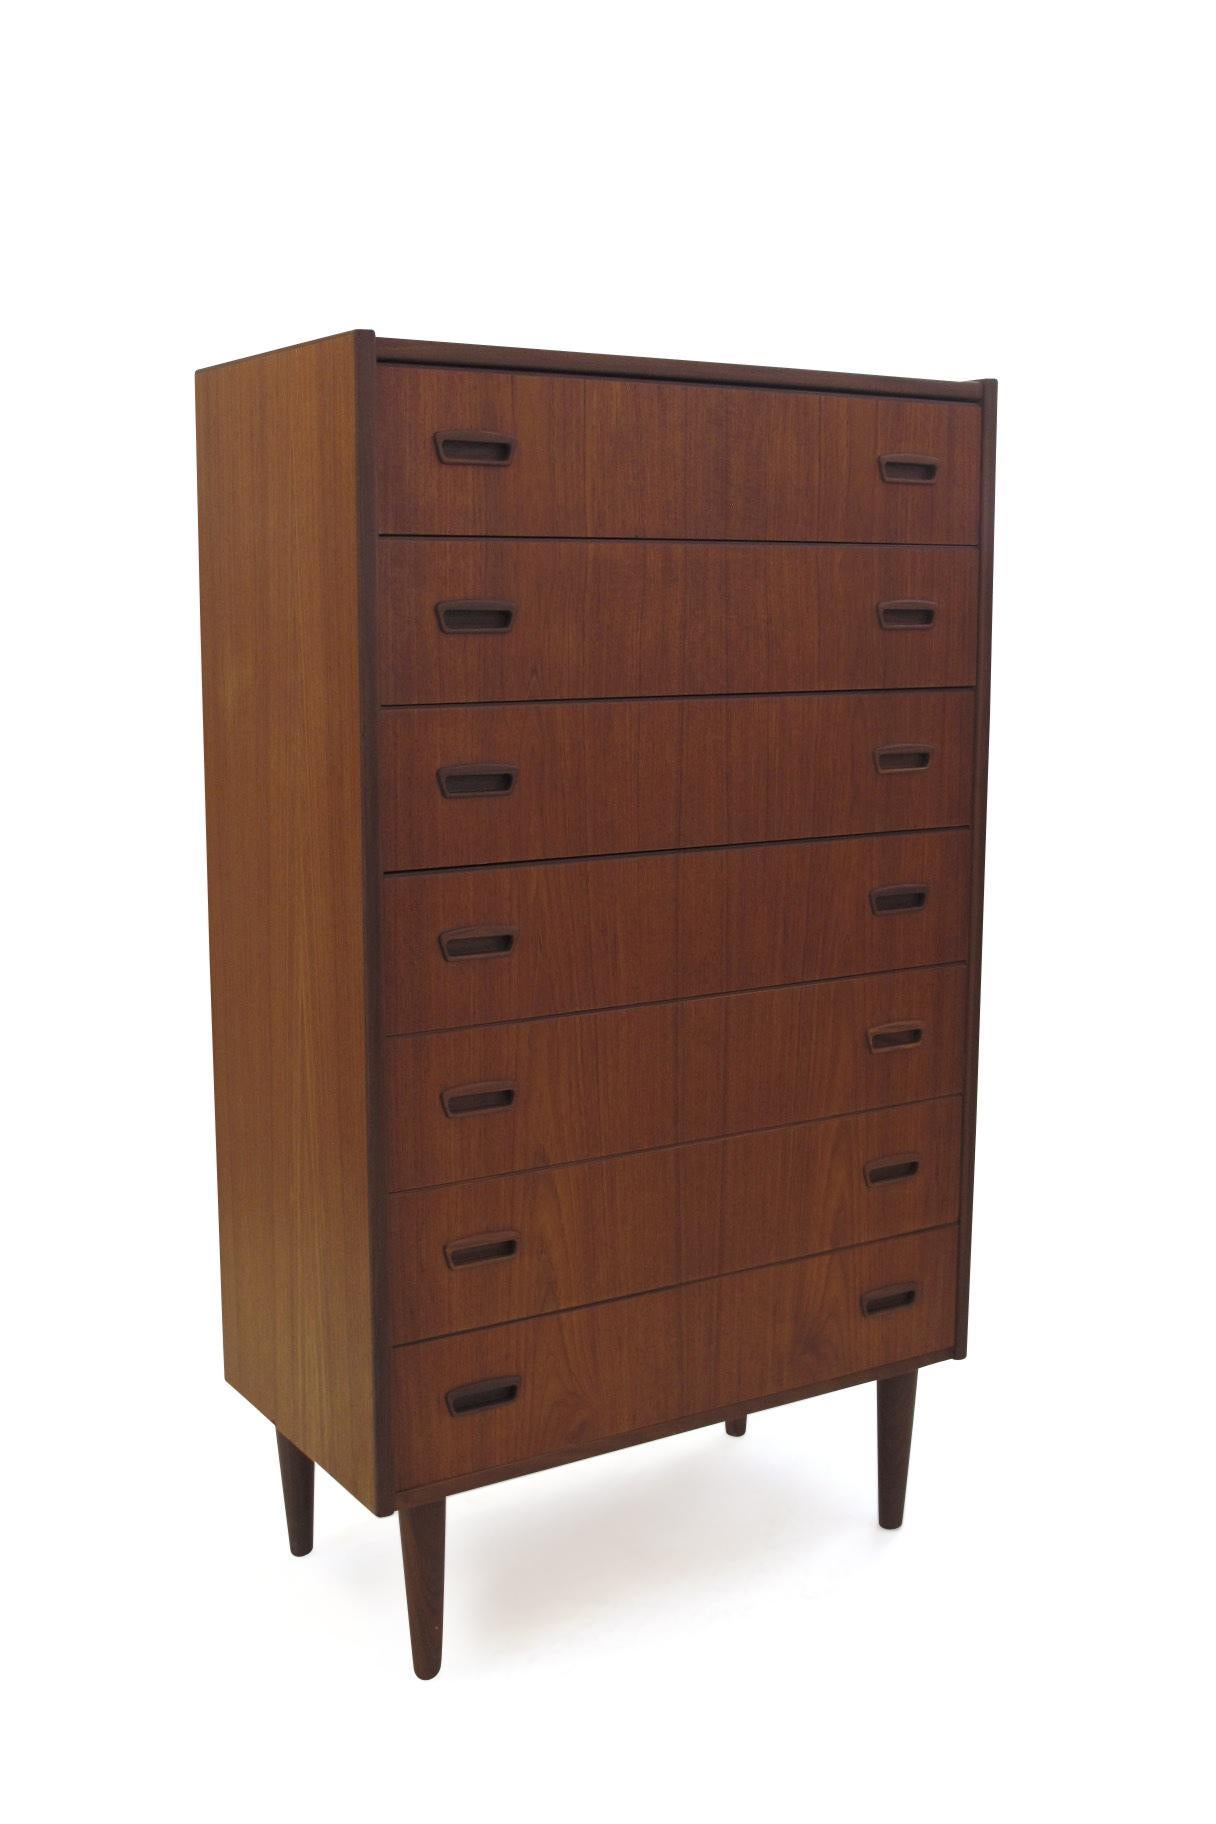 Seven drawer teak dresser professionally restored and in excellent condition.